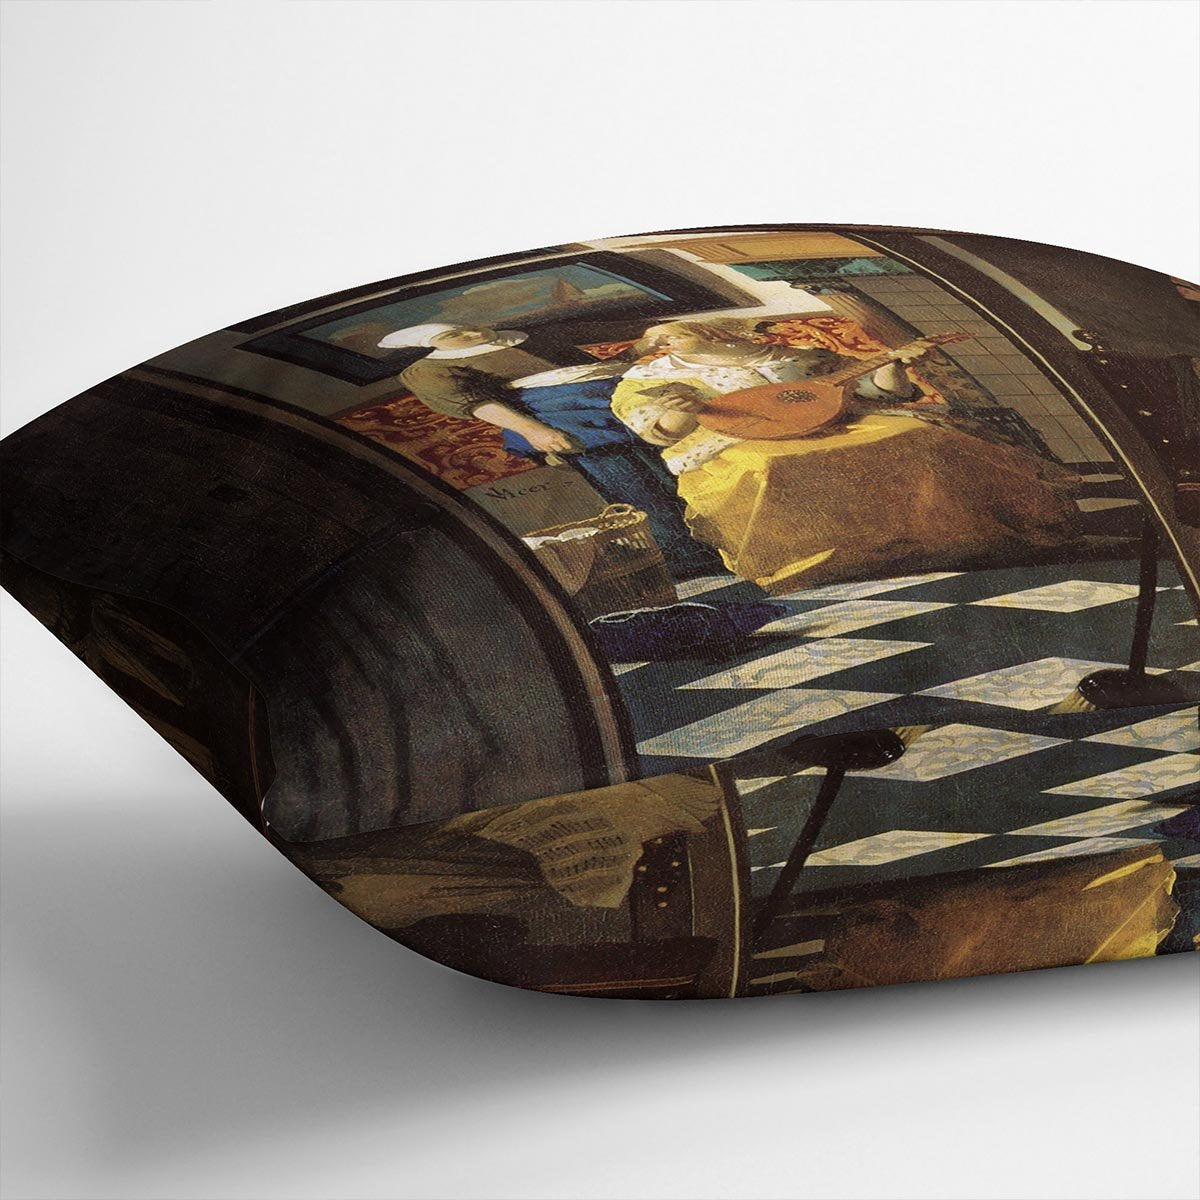 The love letter by Vermeer Cushion